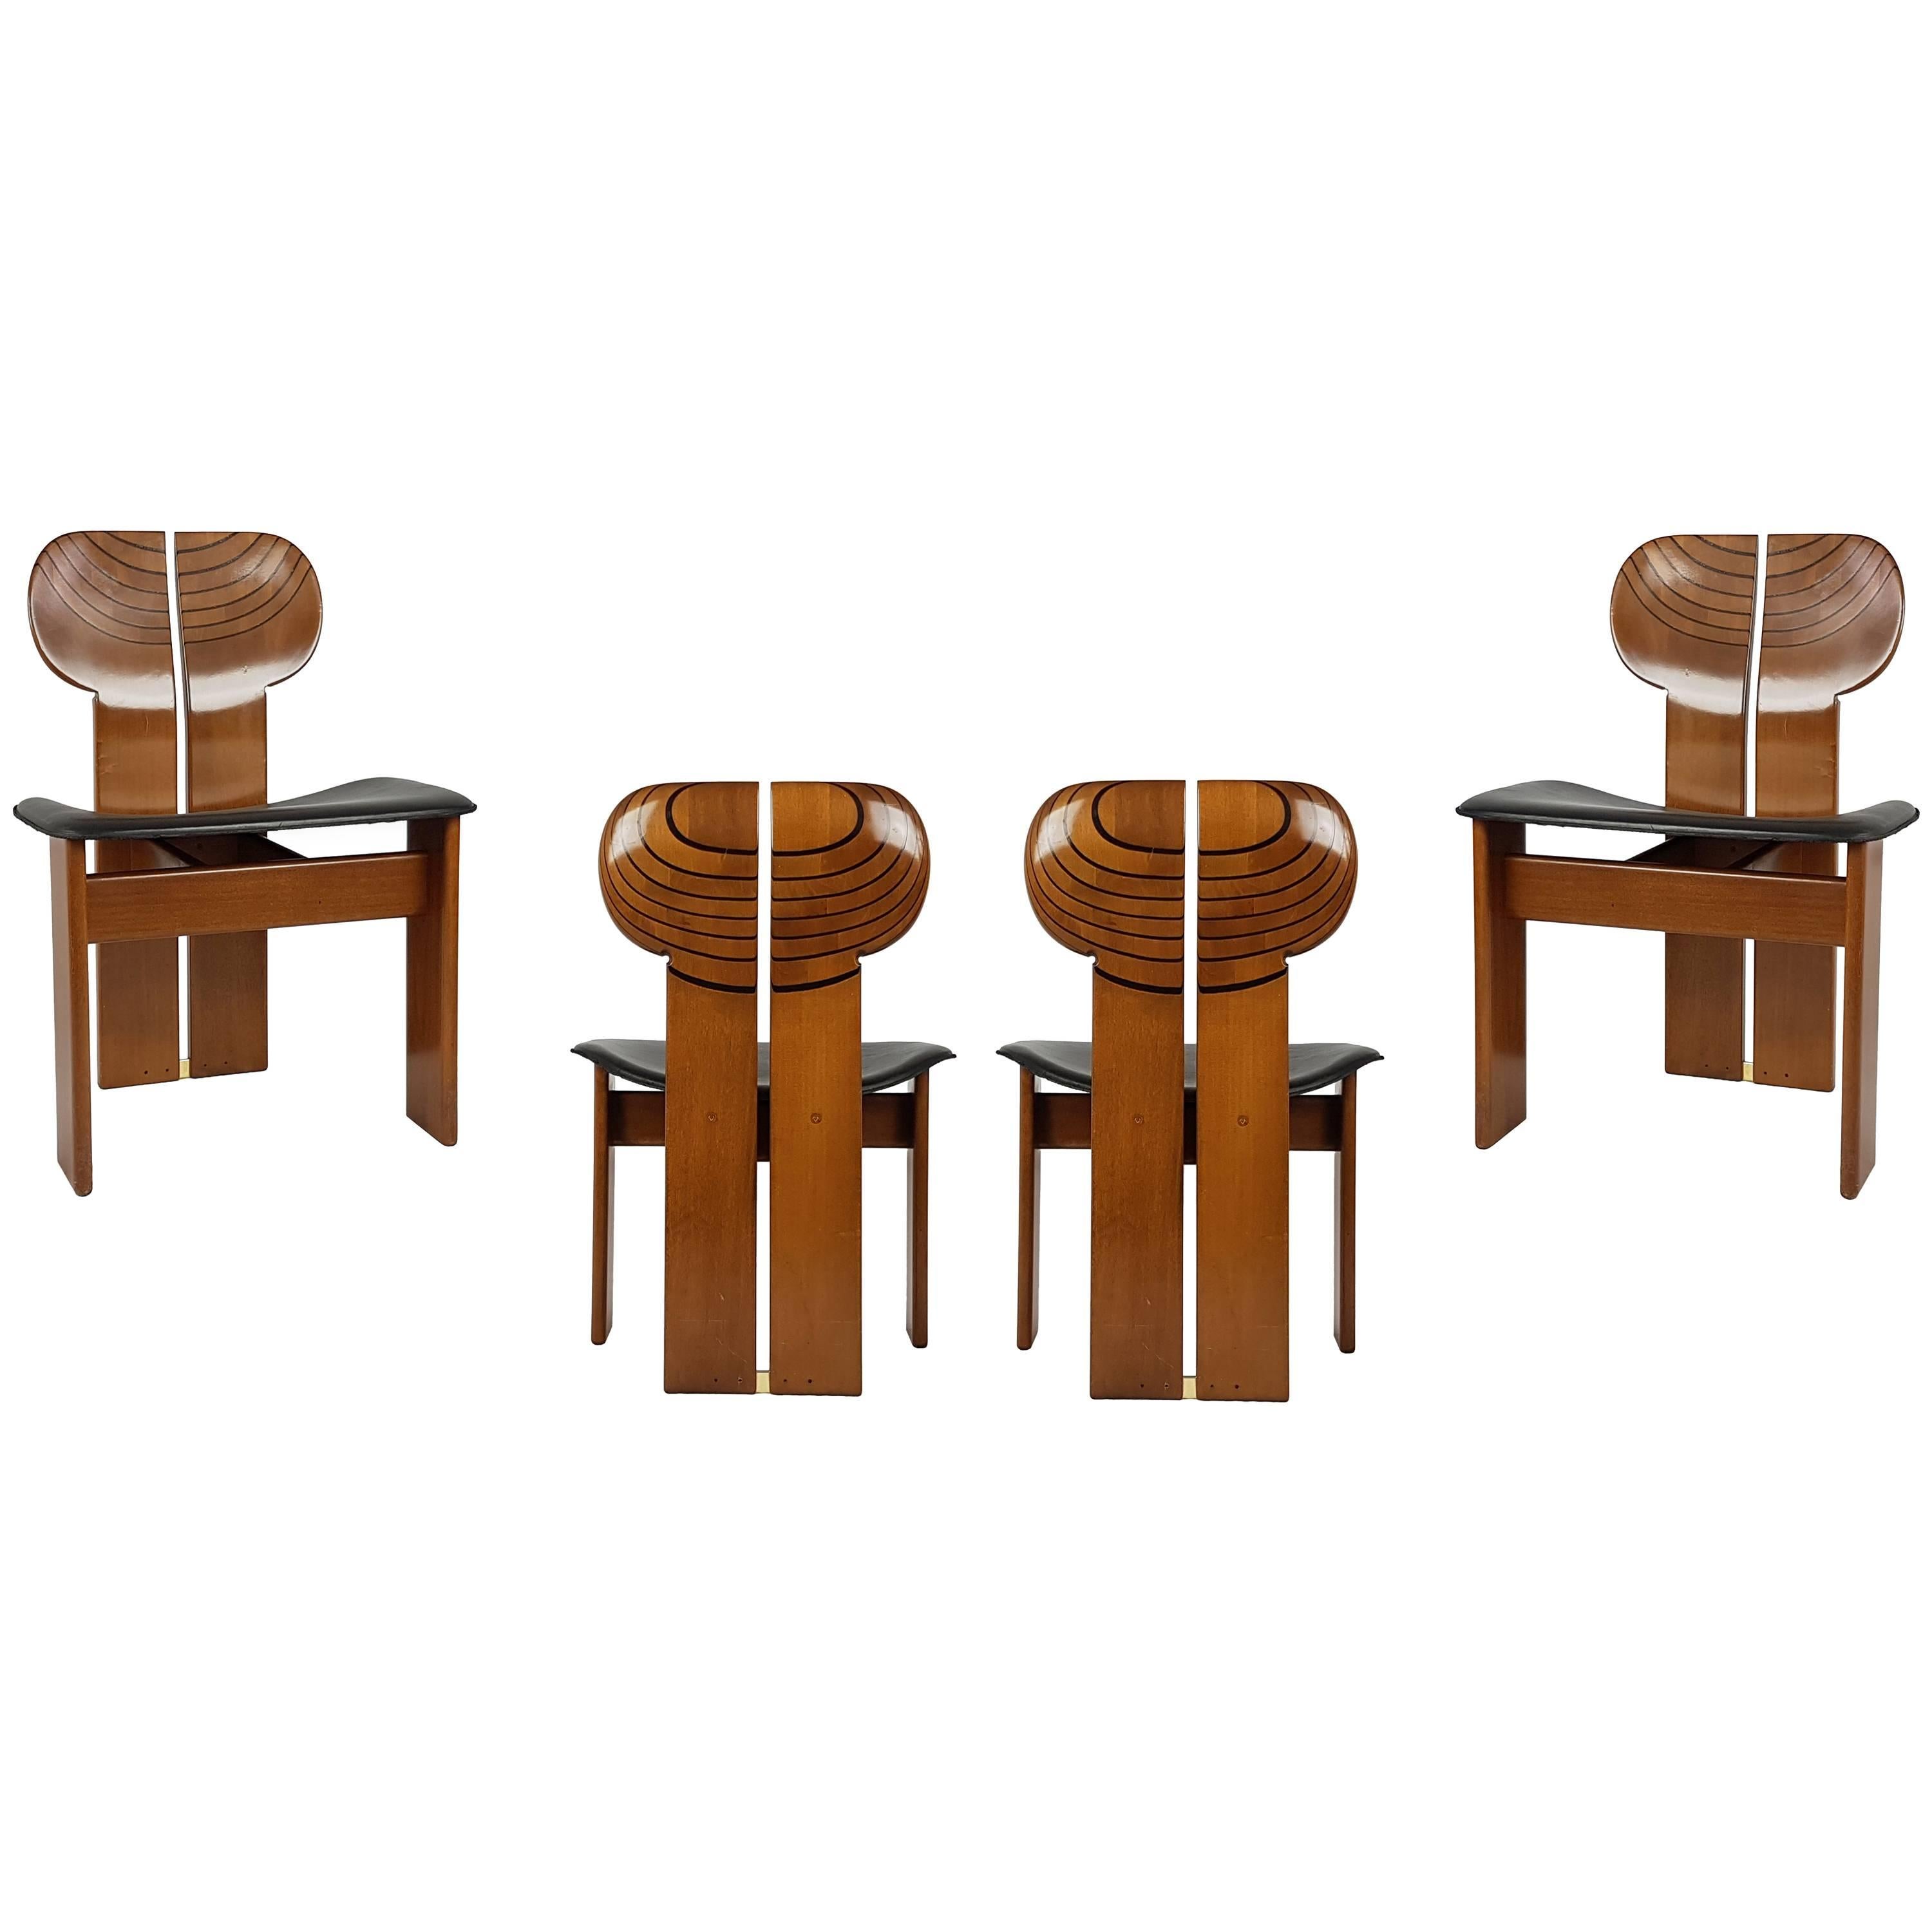 Wooden & Leather Africa Chairs from Artona Serie by A. e T. Scarpa for Maxalto